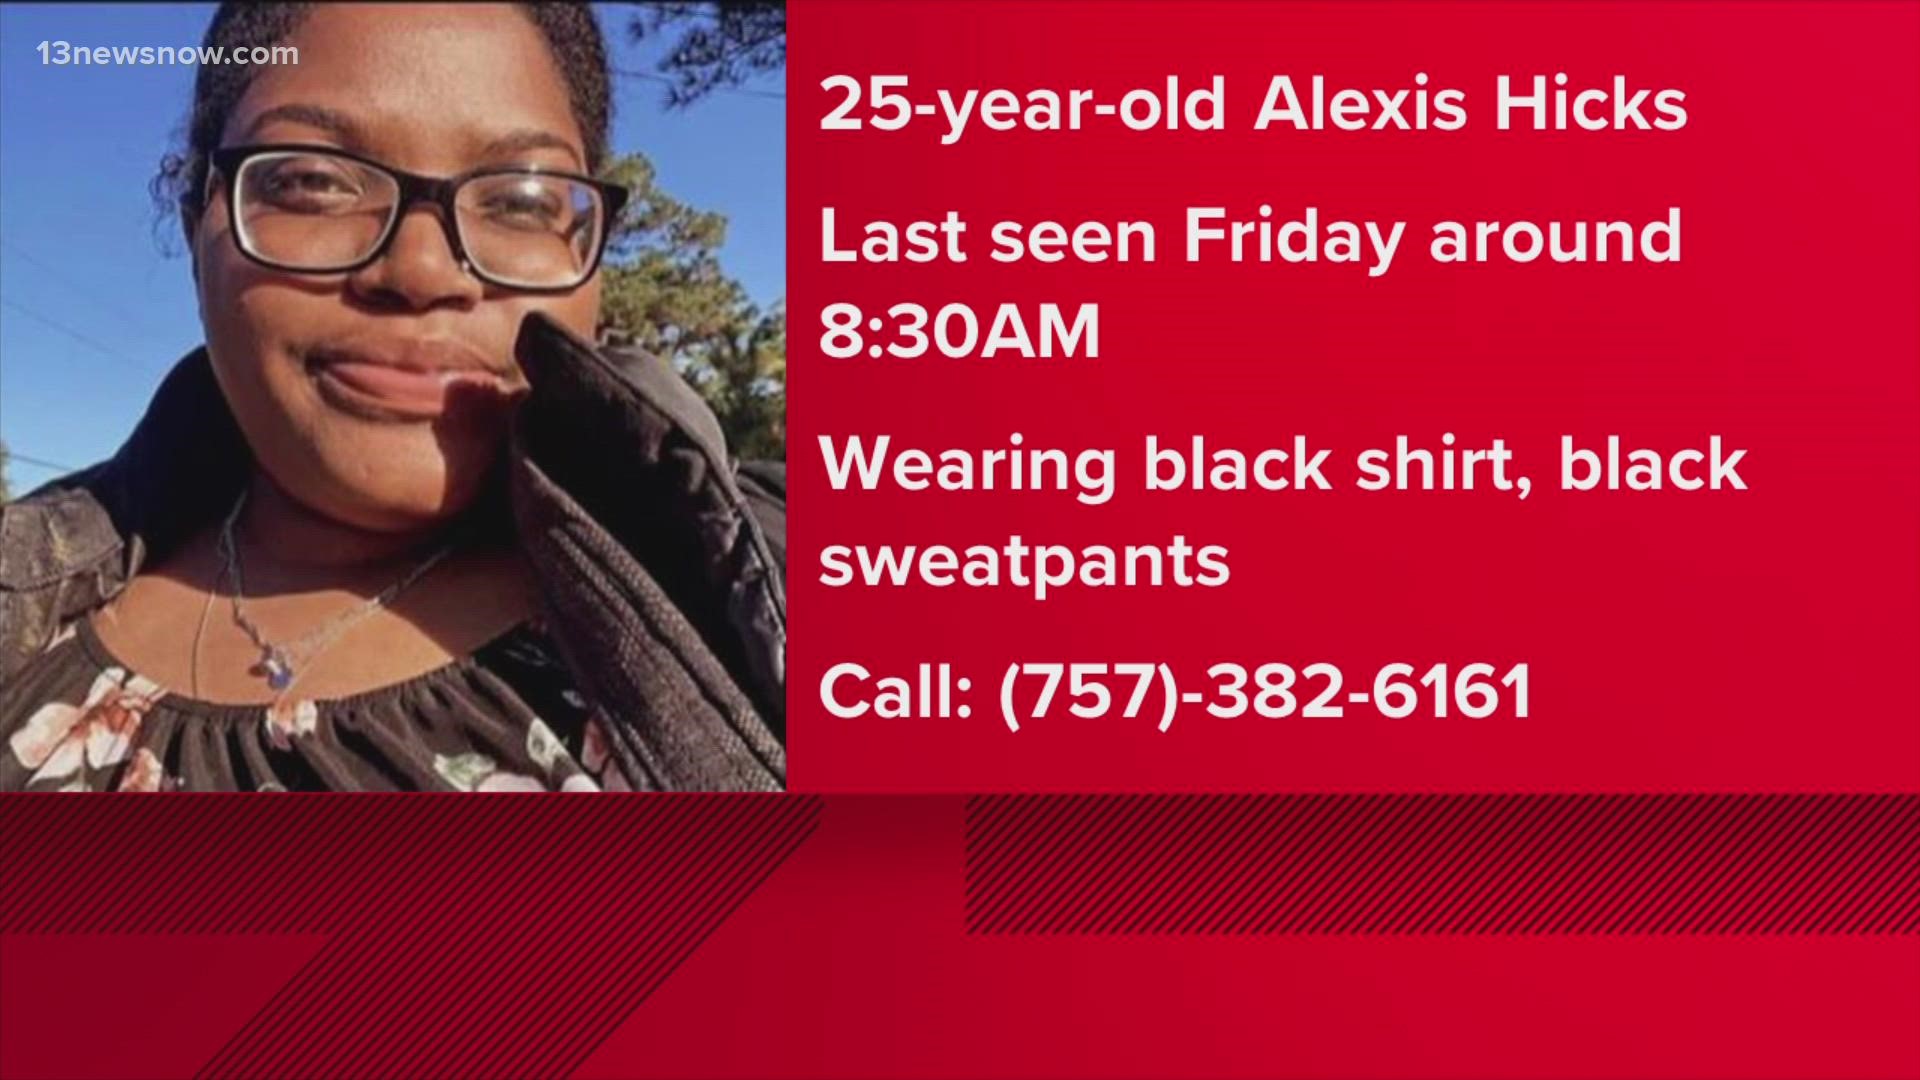 Hicks was last seen wearing a black shirt, black sweatpants and a black and white bag.